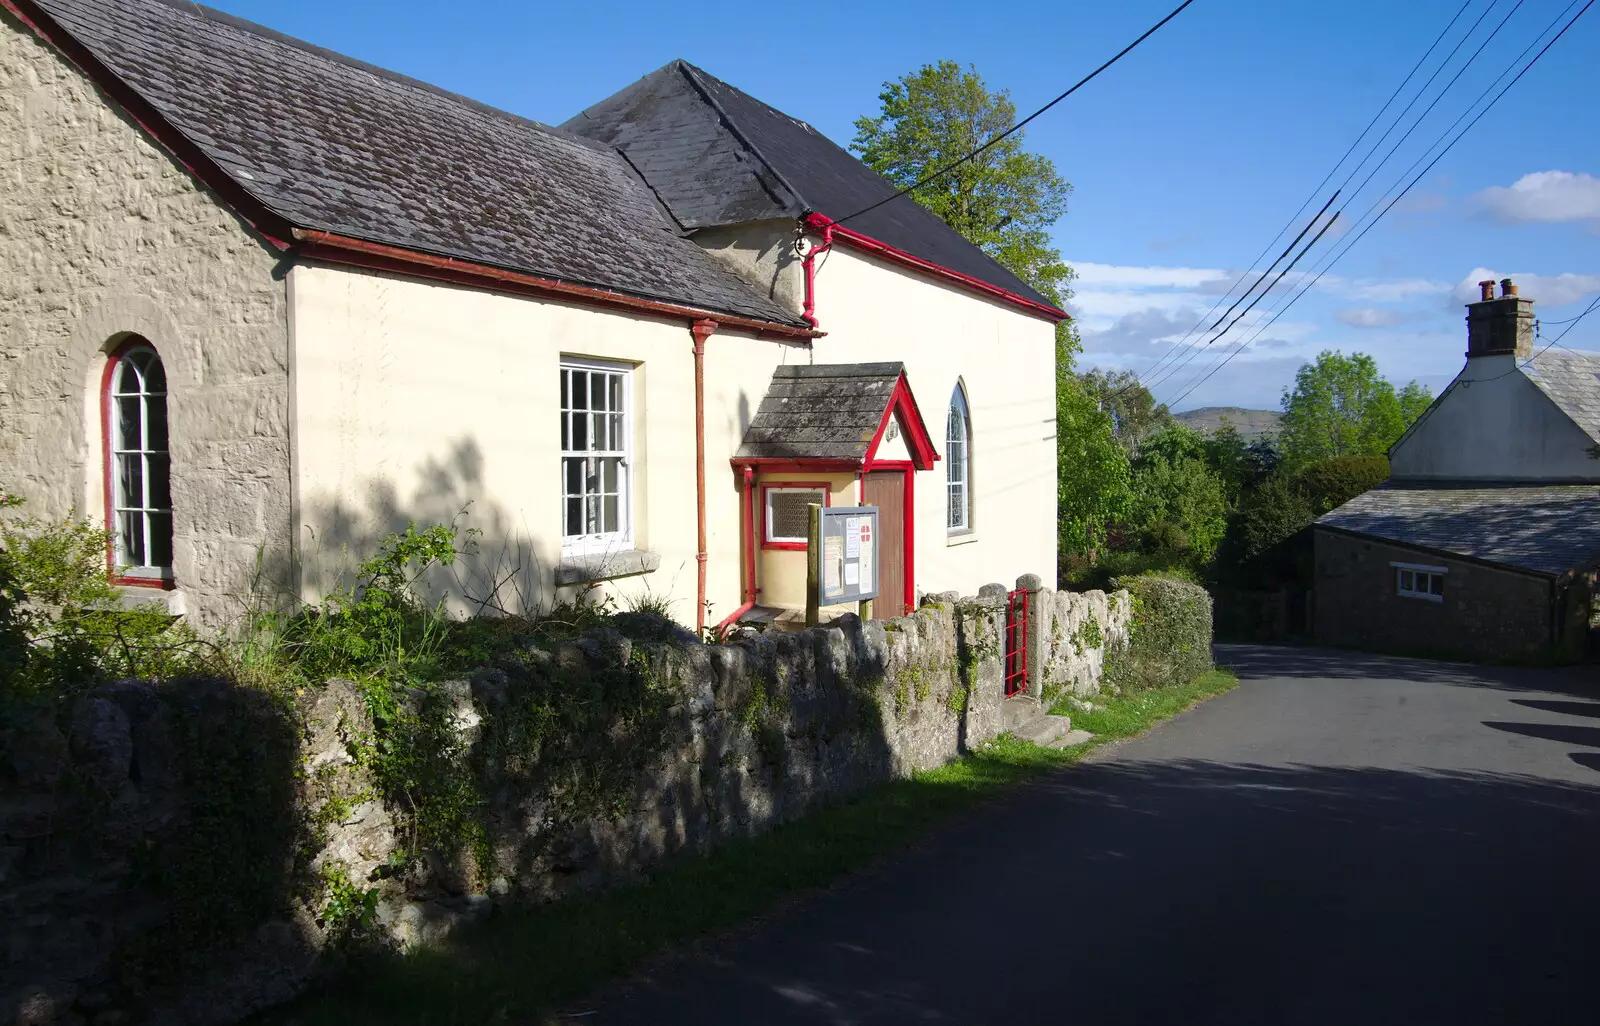 The quaint Providence Chapel, from Chagford Lido and a Trip to Parke, Bovey Tracey, Devon - 25th May 2019